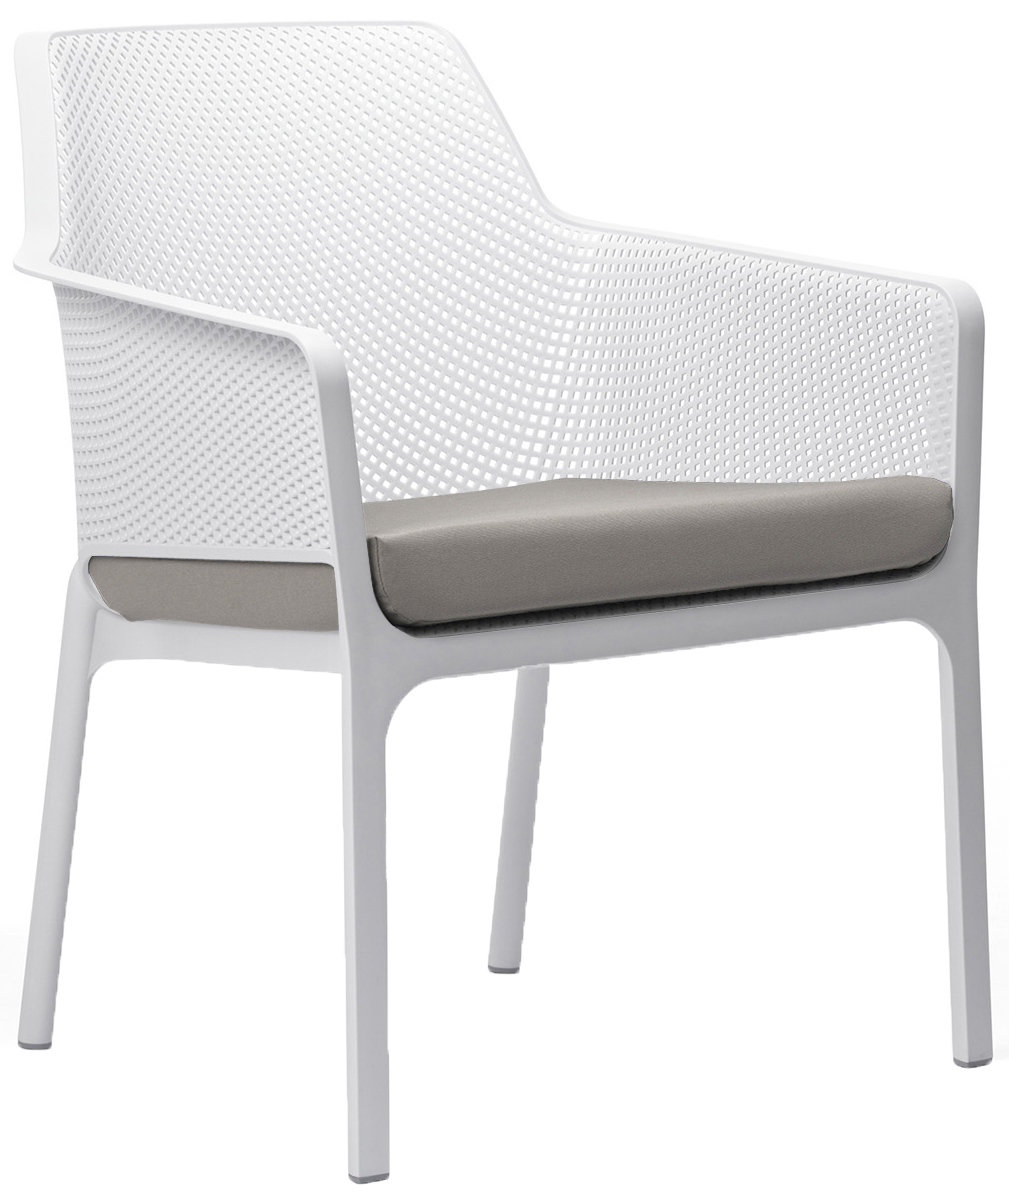 ARM CHAIR NET RELAX WHITE + PAD LIGHT GREY